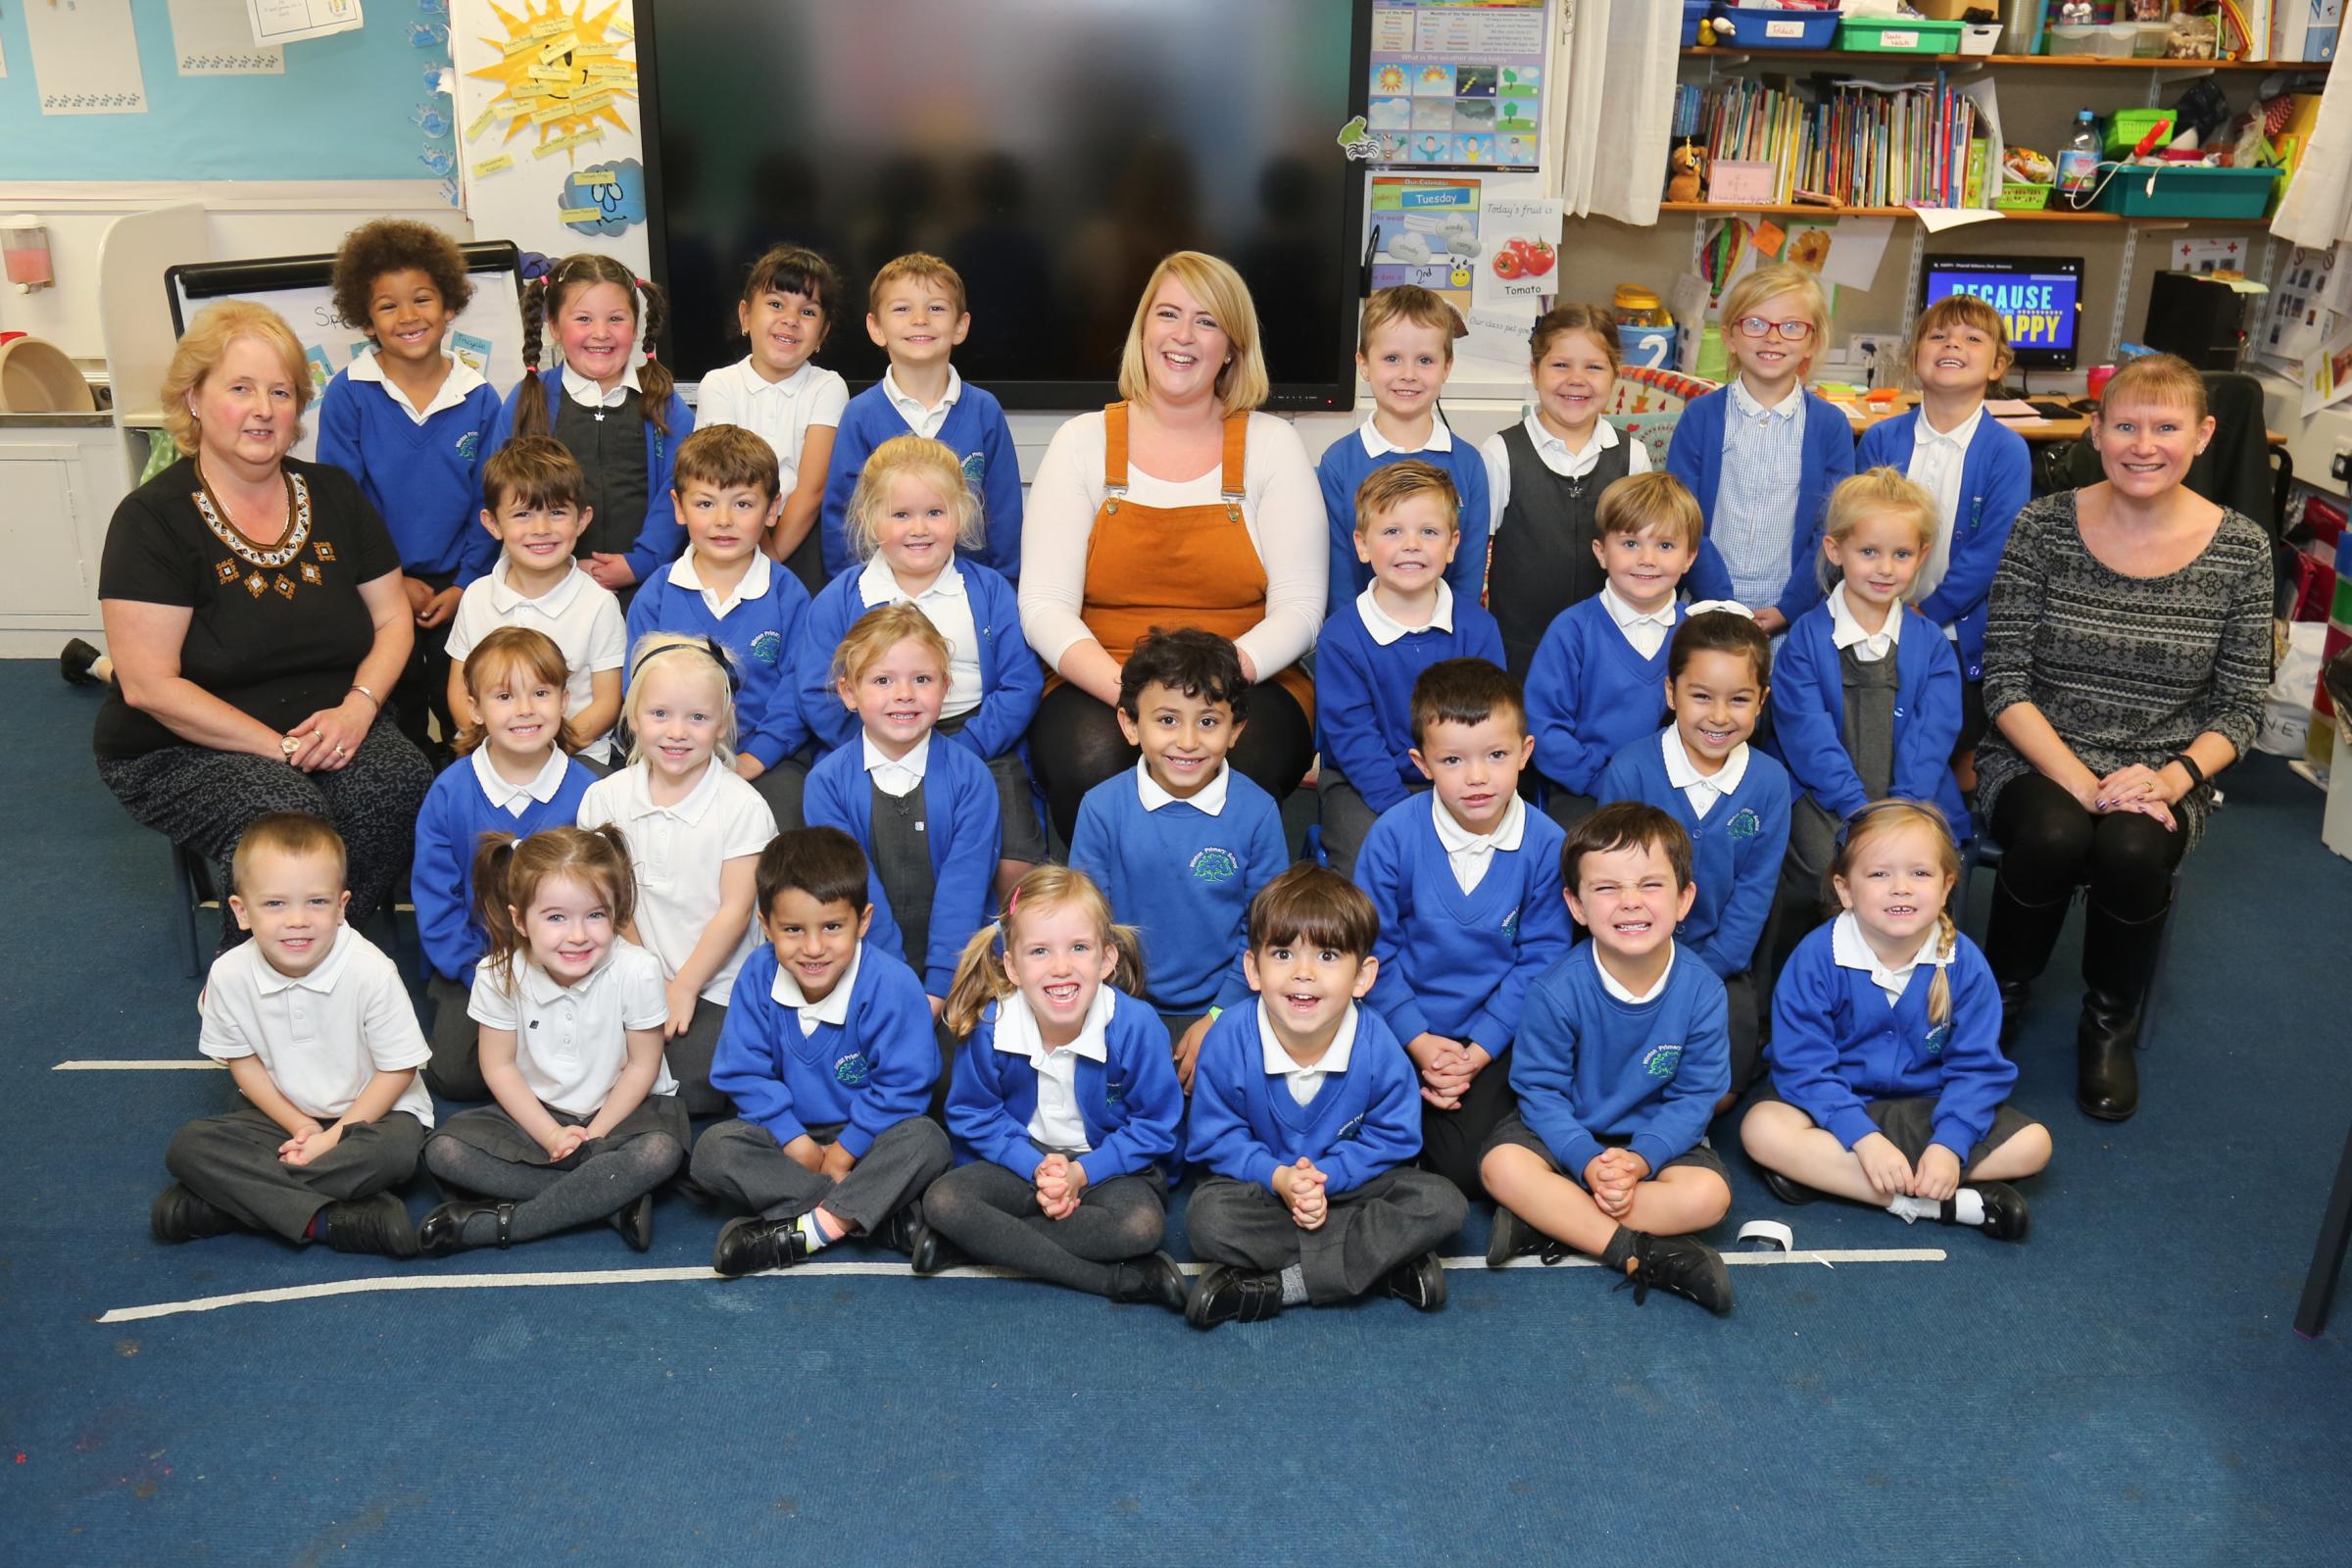 First Class reception pictures from schools in Dorset in today's paper